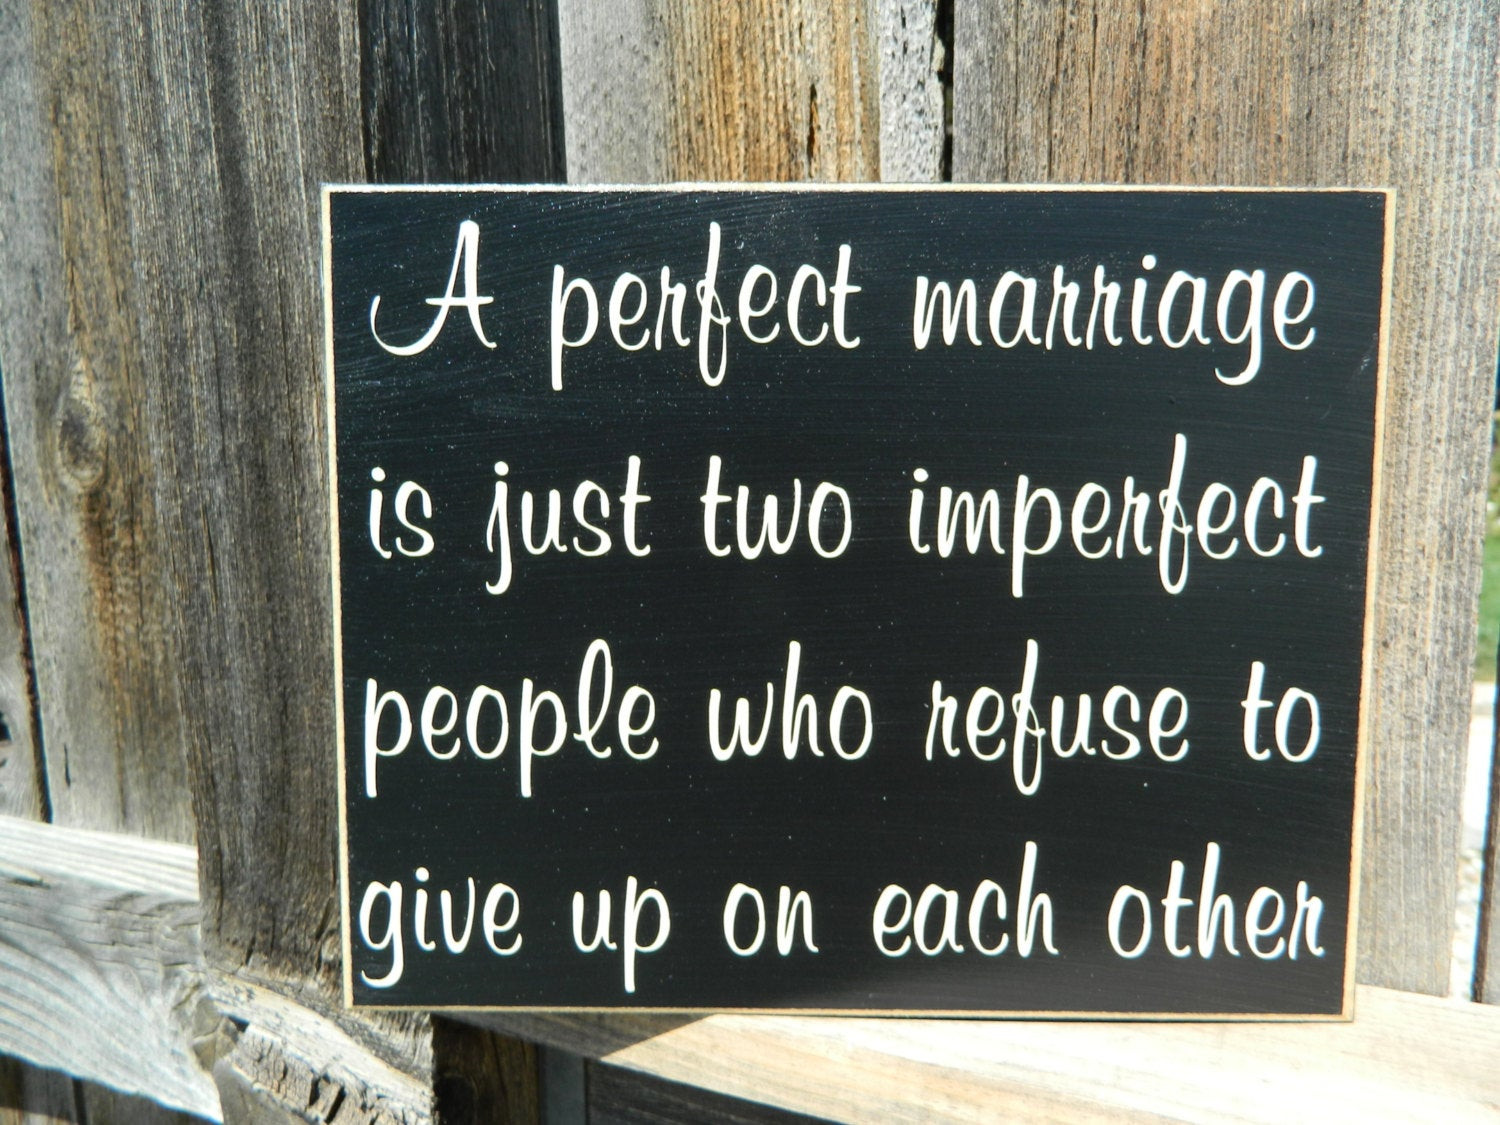 Quotes For Marriage
 Inspirational QuoteA perfect marriage wood sign